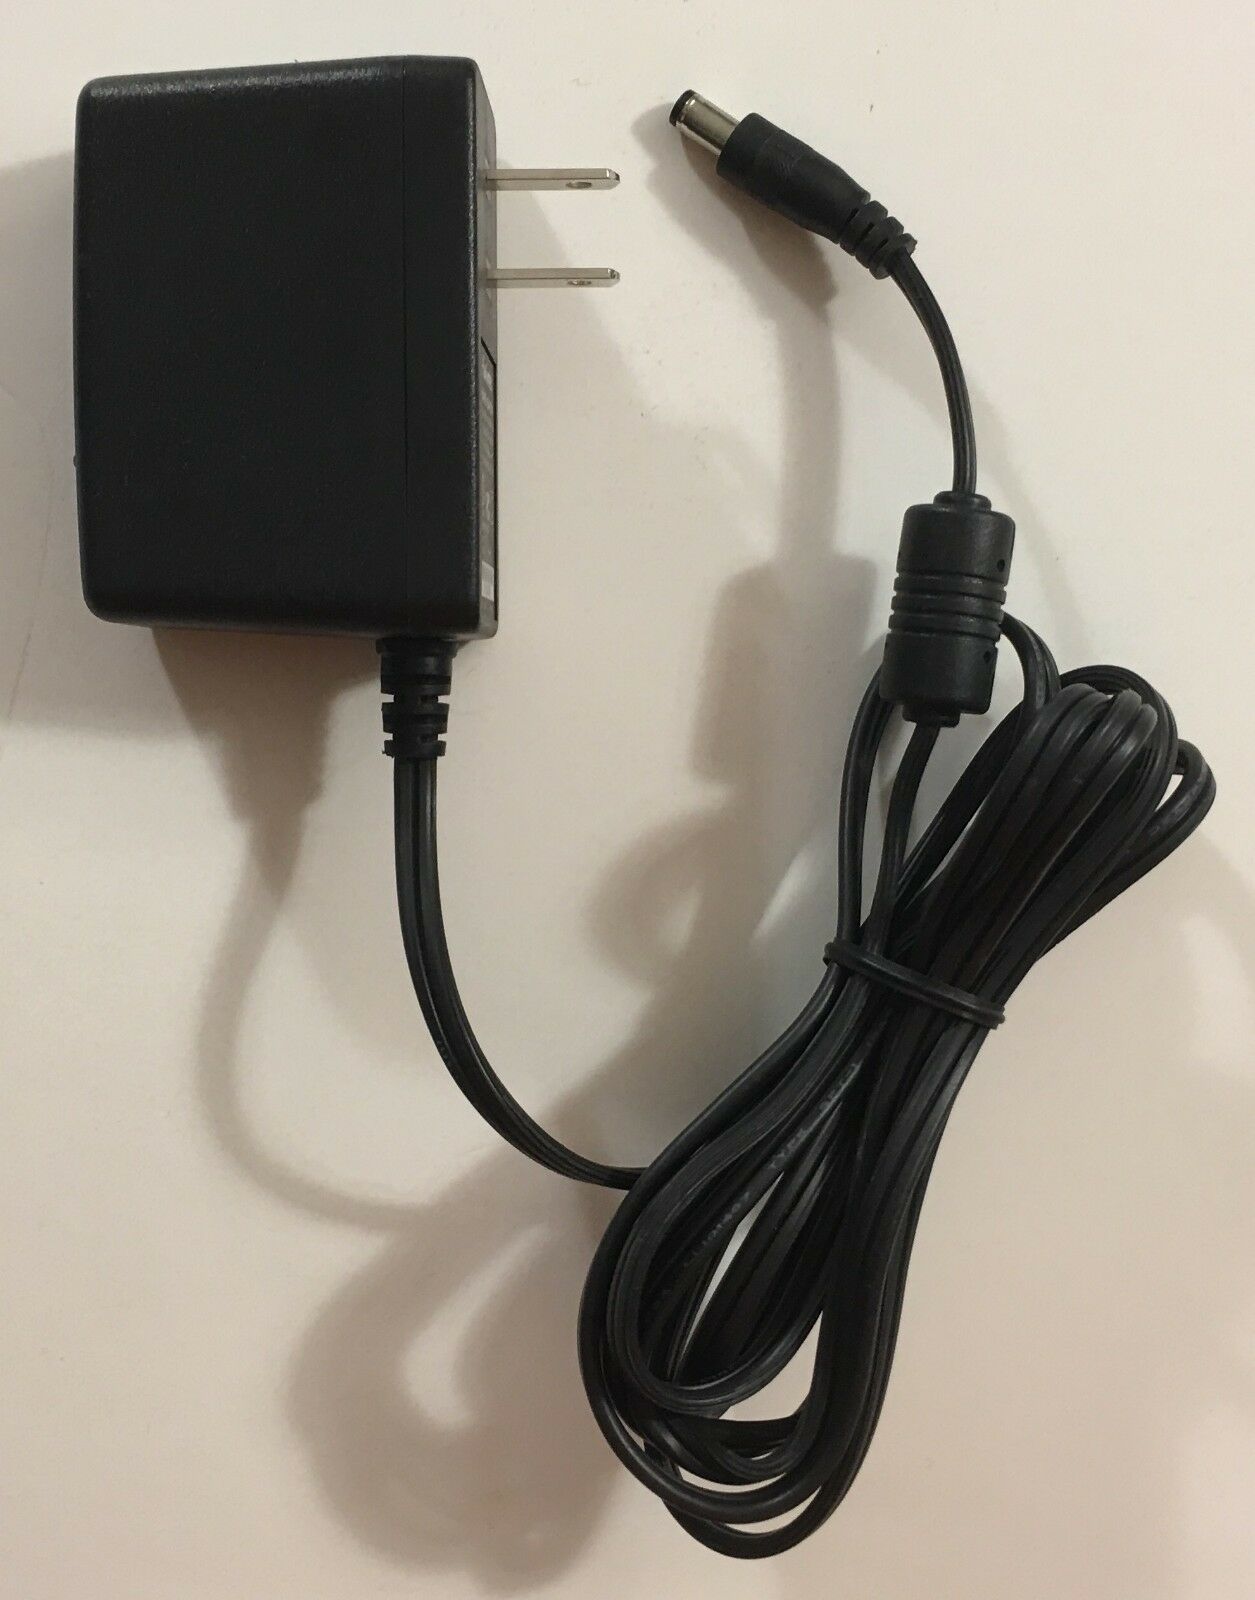 Brand new Actiontec 5VDC 3A 15W ADS6818-1505-WD Power Adapter for MI424WR Verizon Router